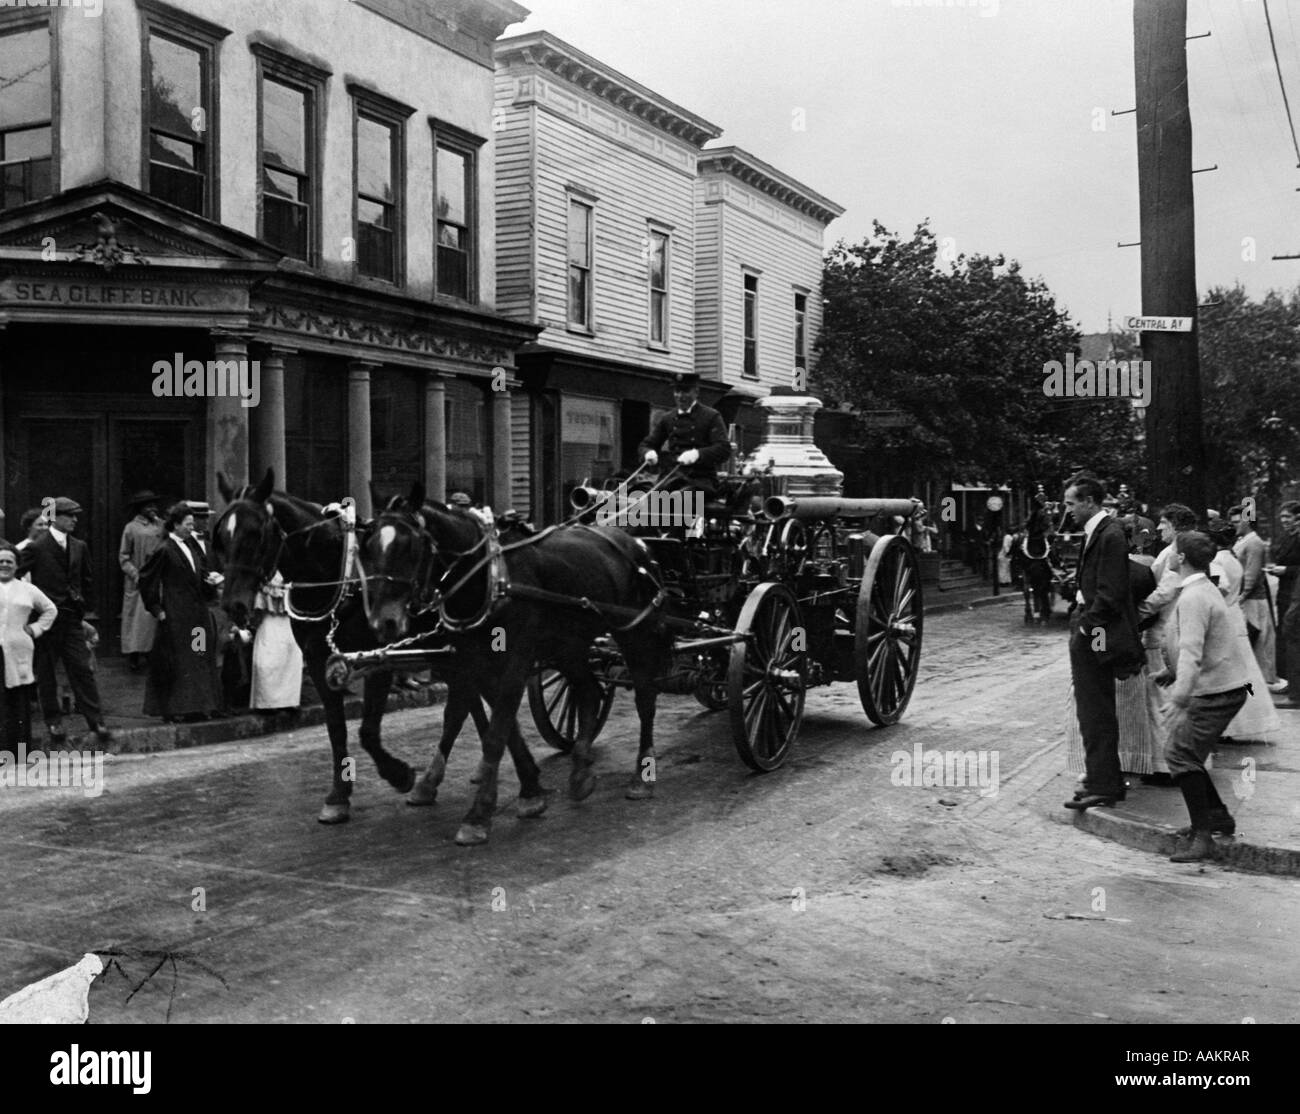 TURN OF THE CENTURY HORSE-DRAWN FIRE TRUCK PARADING THROUGH TOWN WITH PEOPLE LINING STREETS Stock Photo